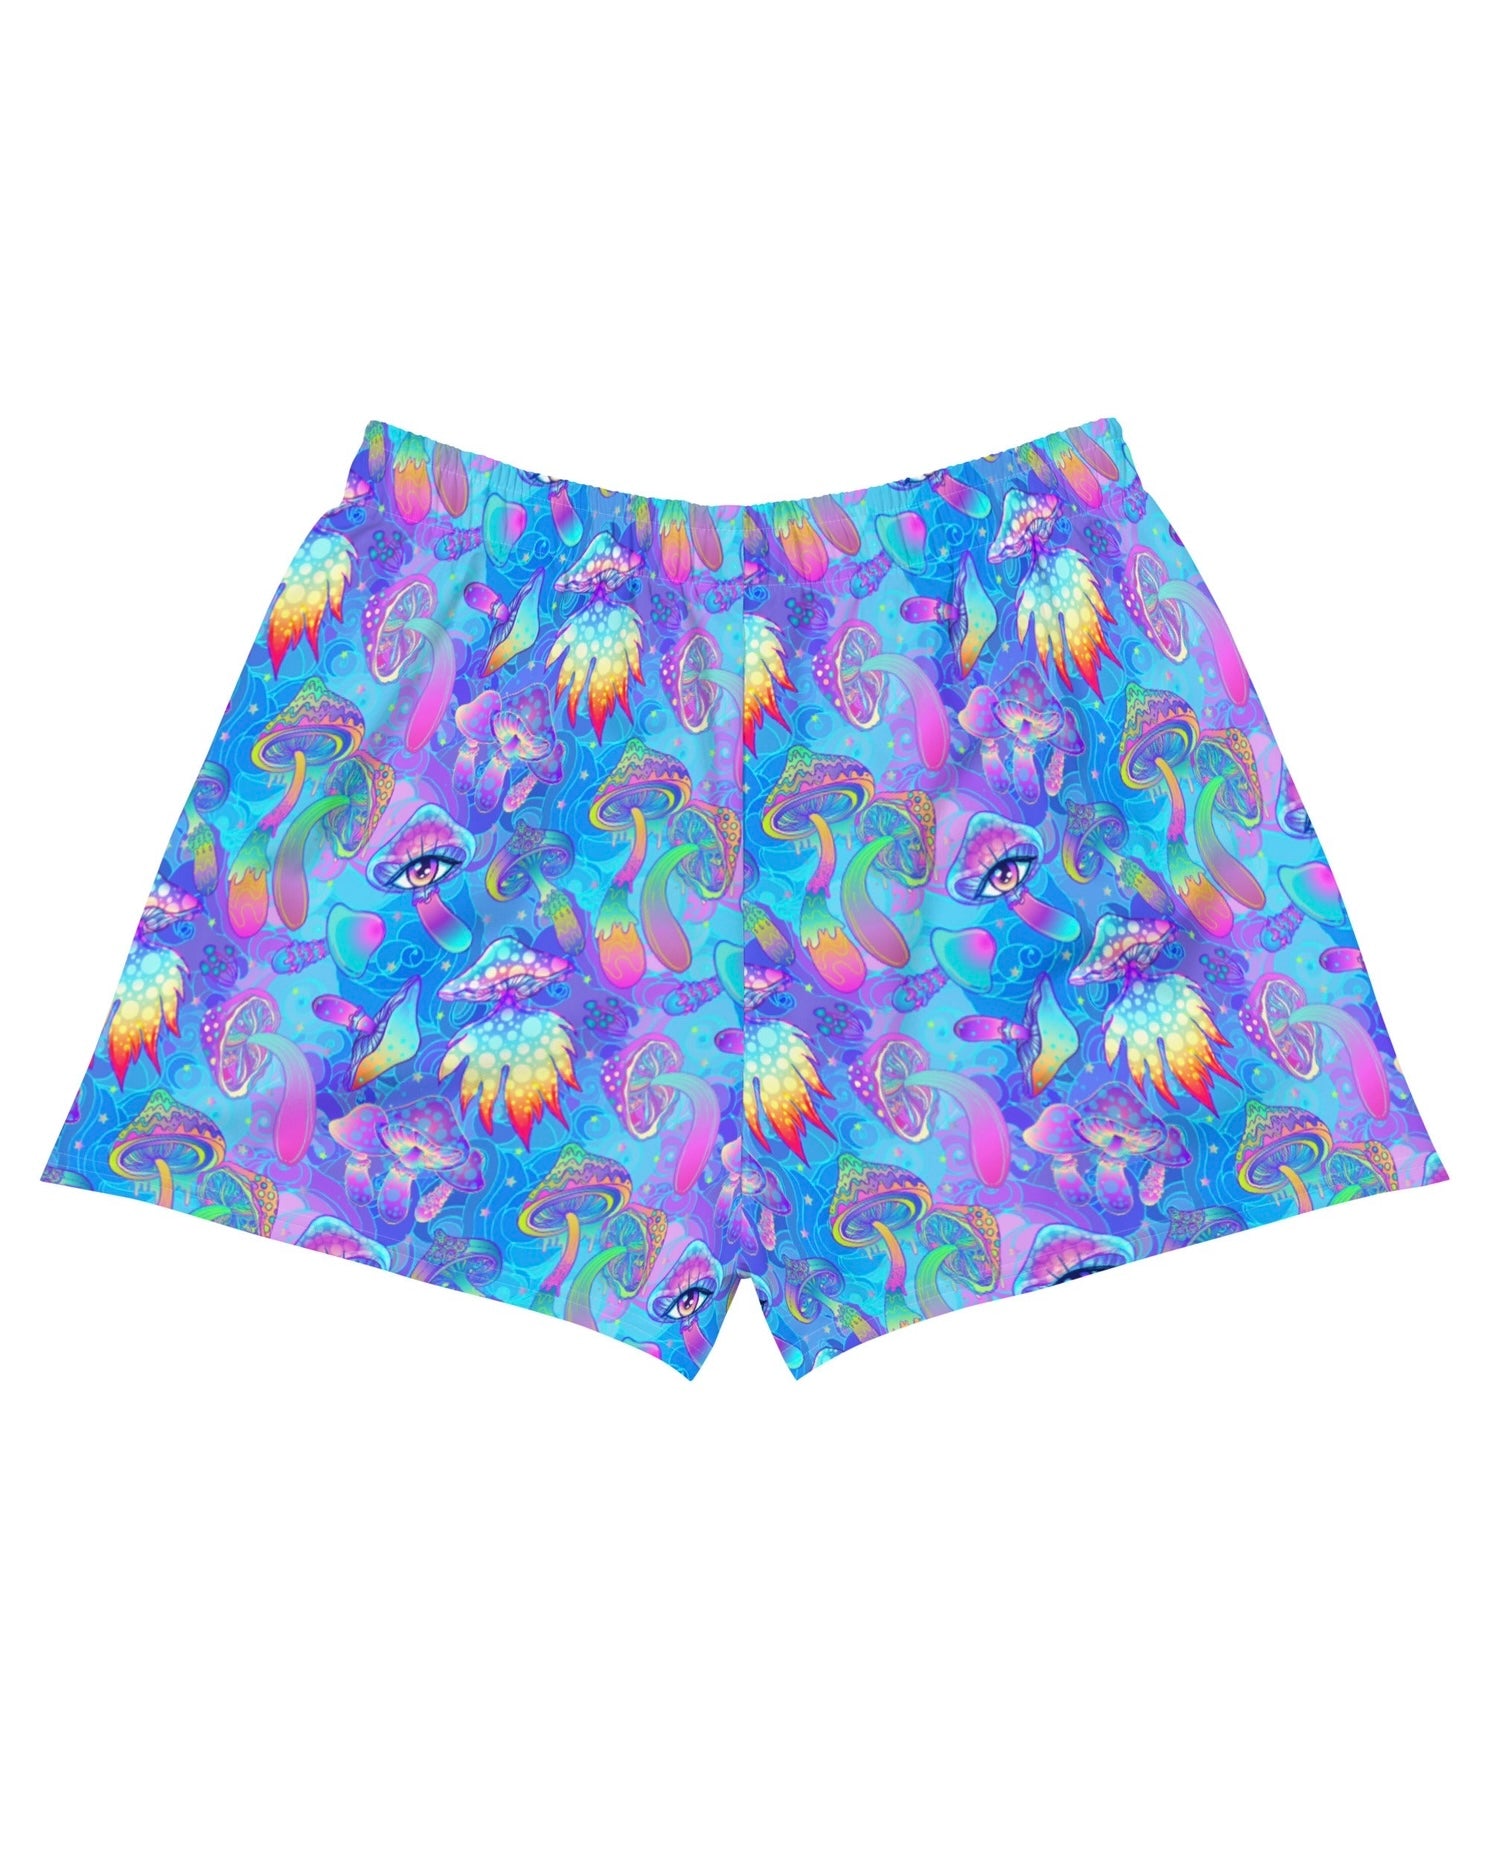 Shroomin Blue Recycled Shorts, Athletic Shorts, - One Stop Rave